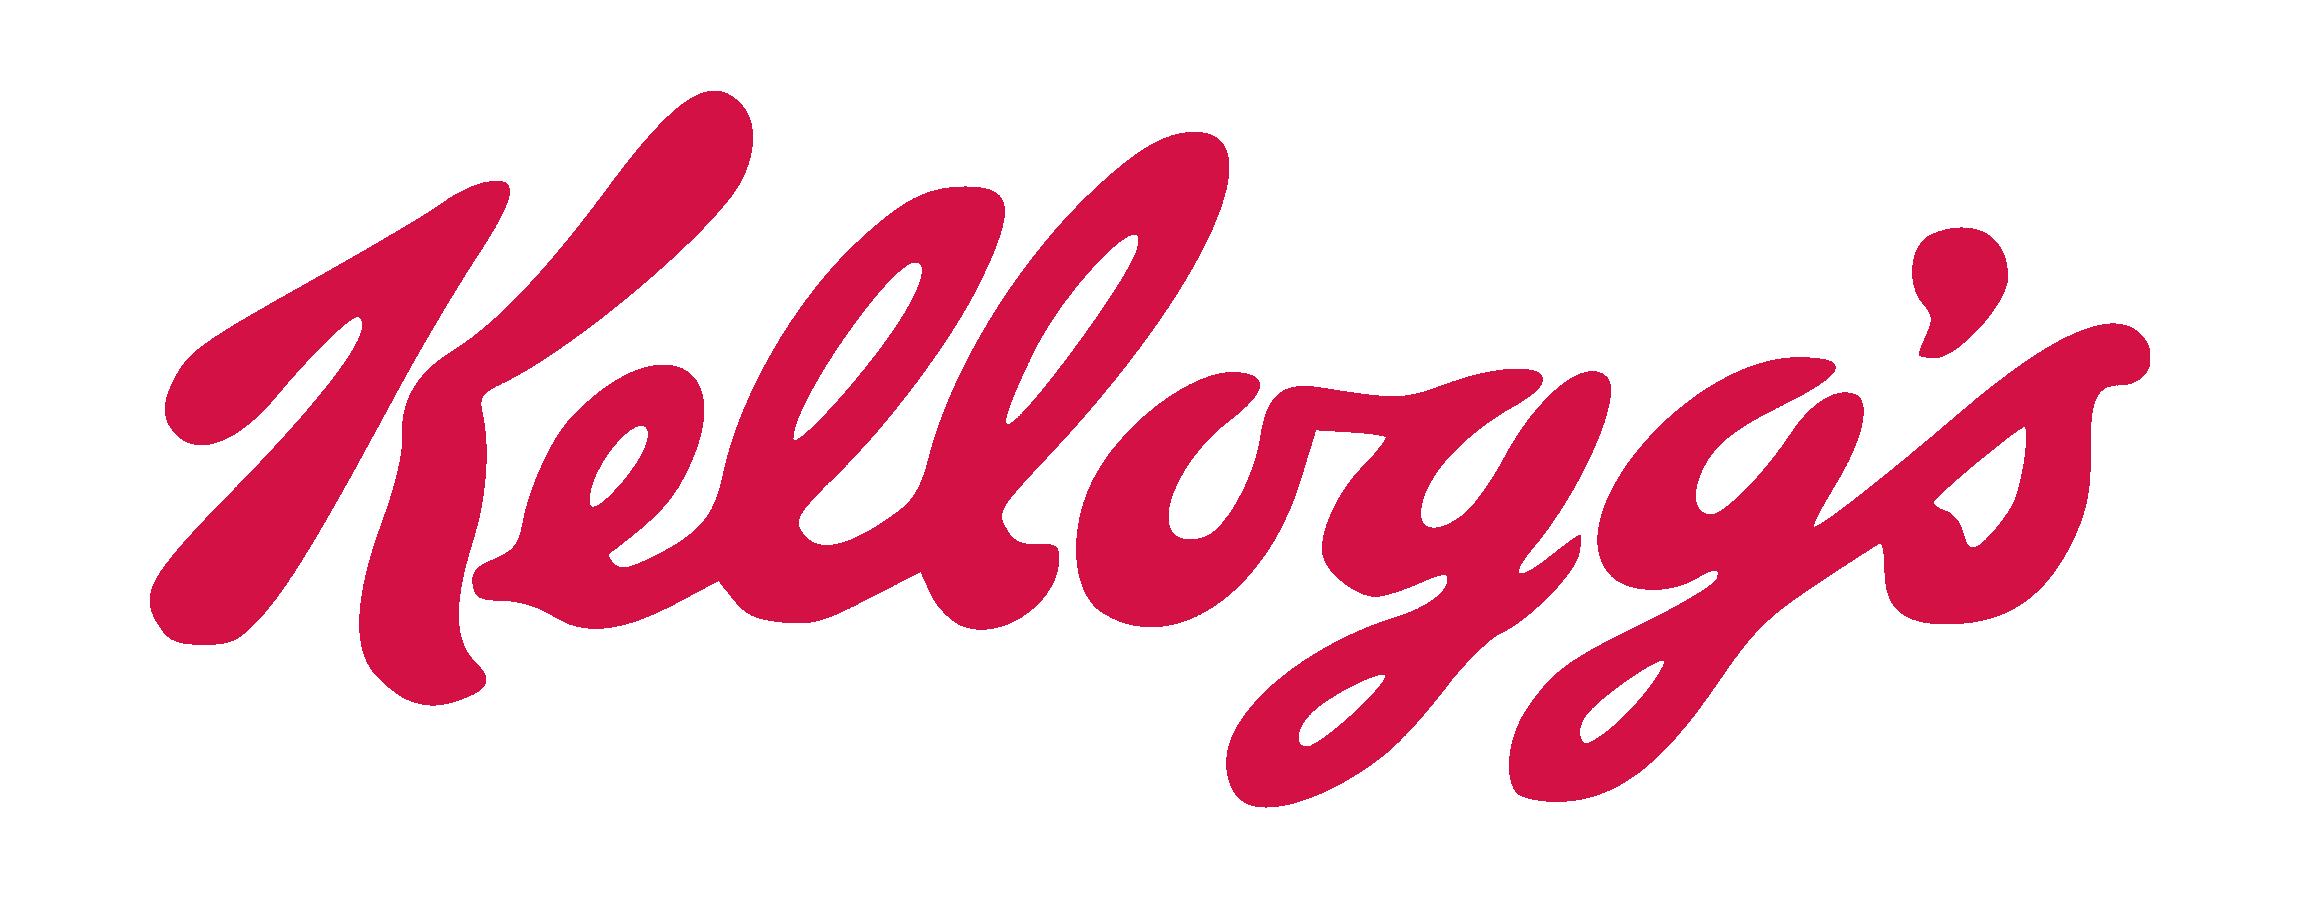 Kelogs Logo - Meaning Kelloggs logo and symbol | history and evolution